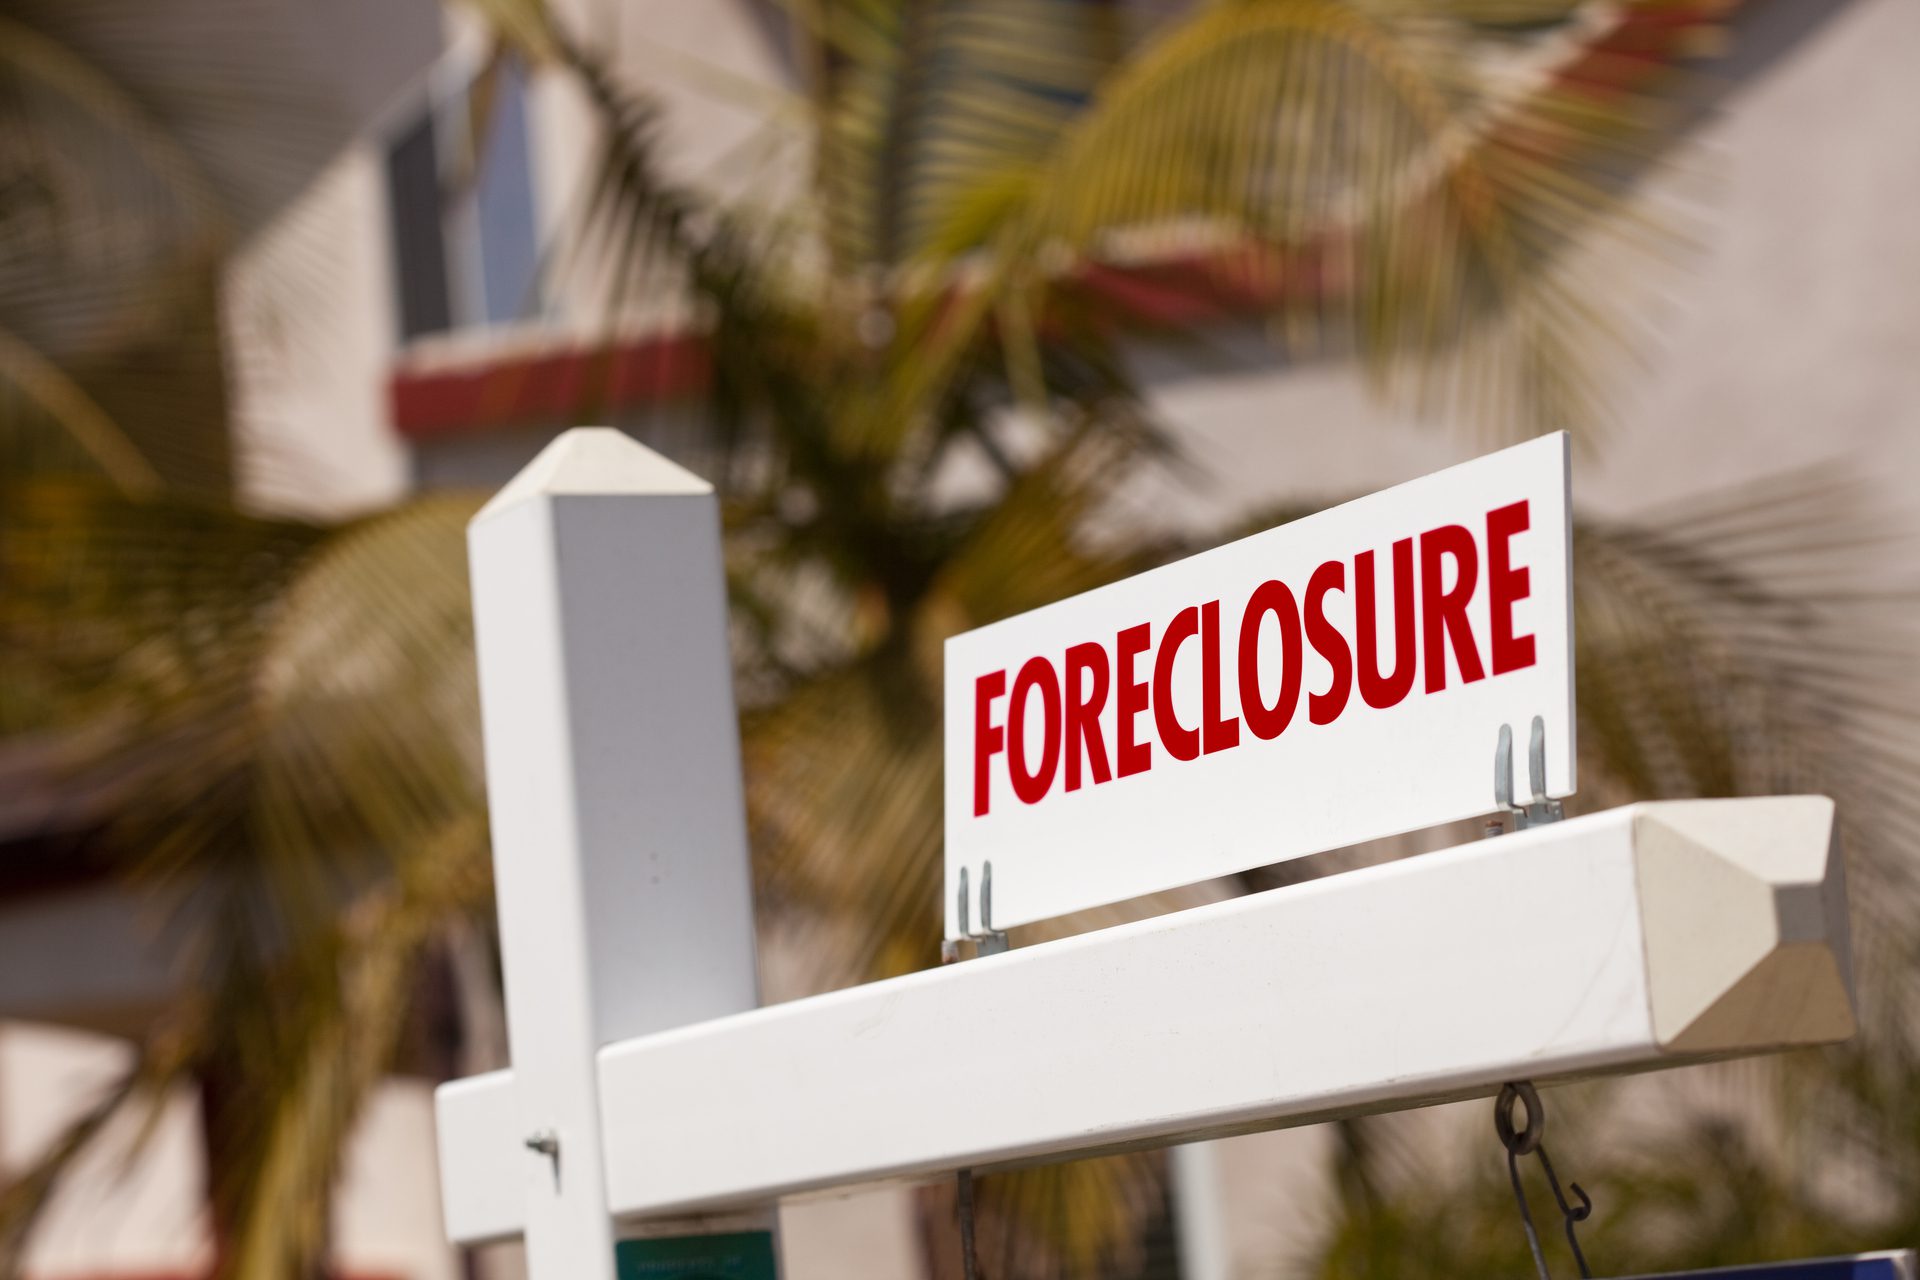 Florida Foreclosures: How to Buy Foreclosed Homes in Florida